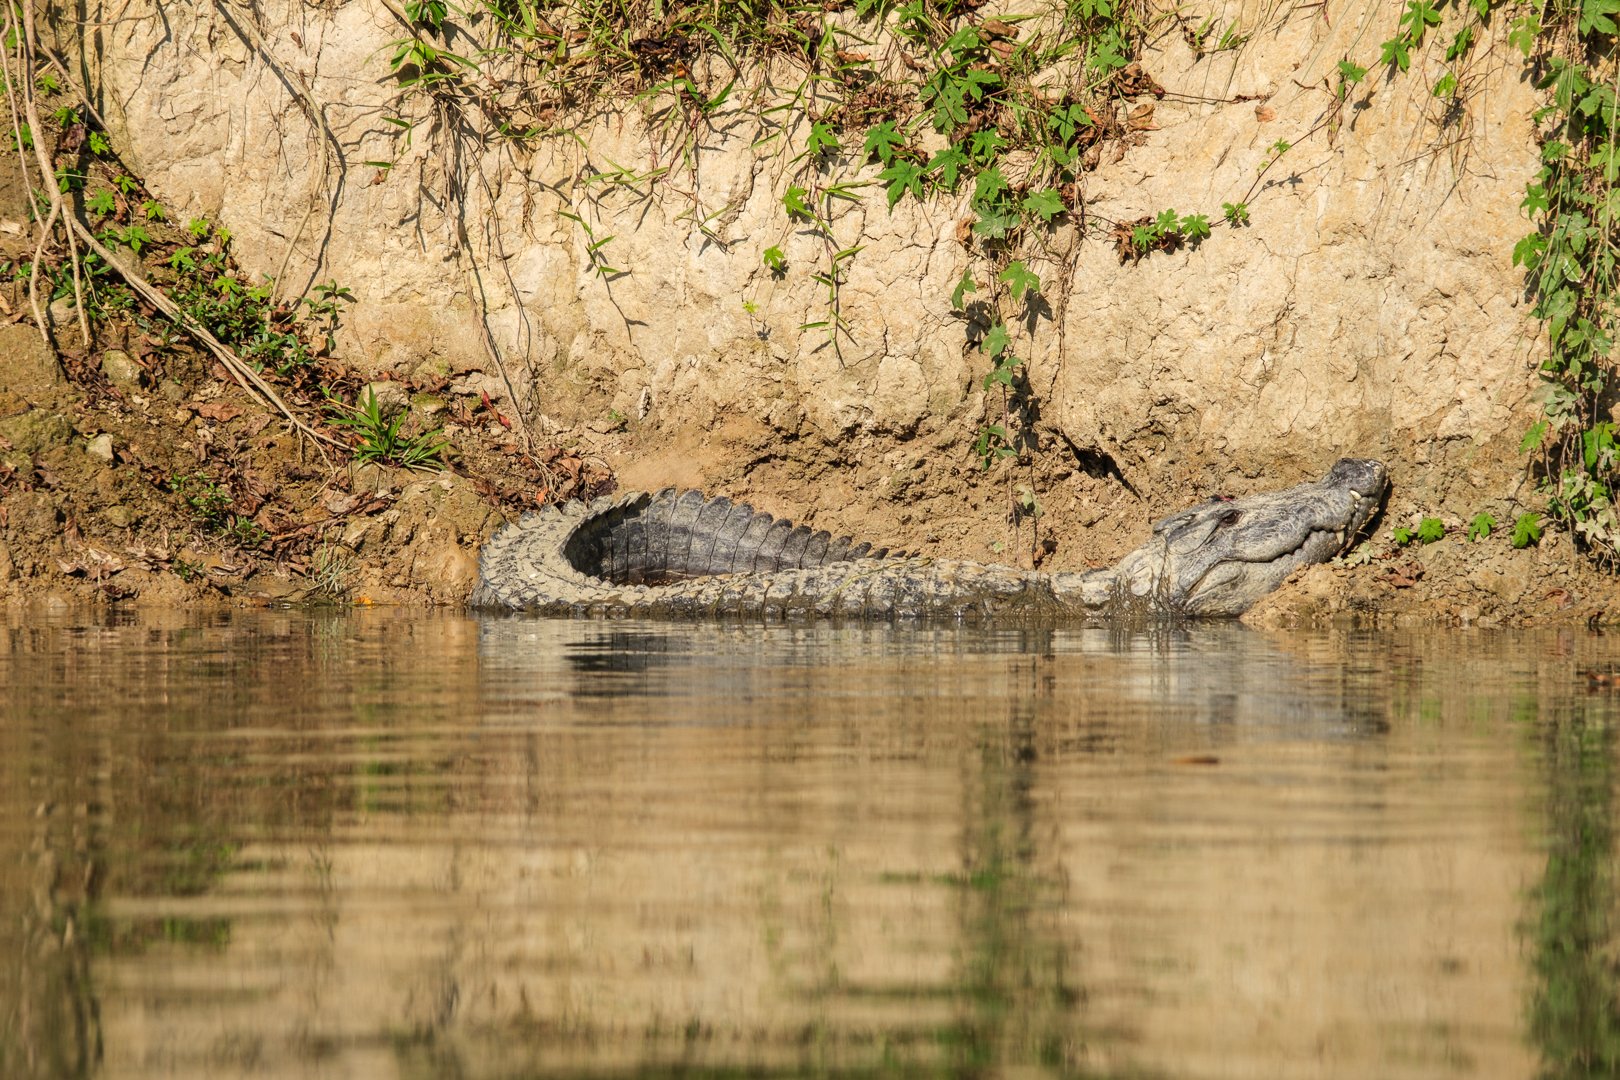 Crocodile basking in the water spotted on a safari expedition